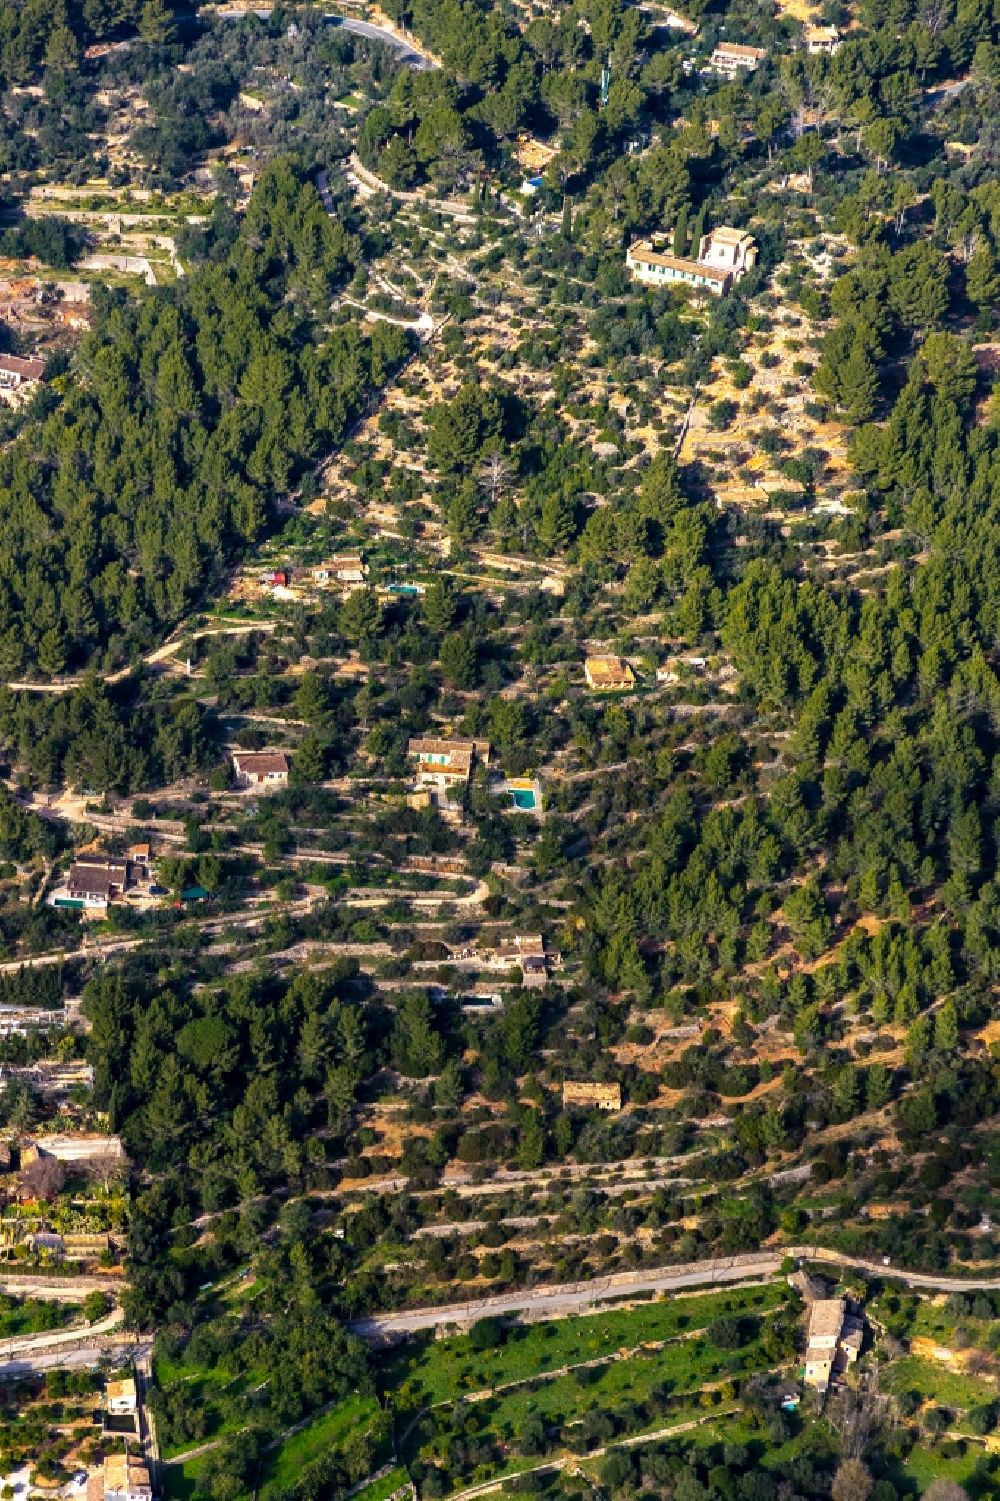 Aerial photograph Soller - Serpentine-shaped curve of a road guide in Soller in Balearic Islands, Spain